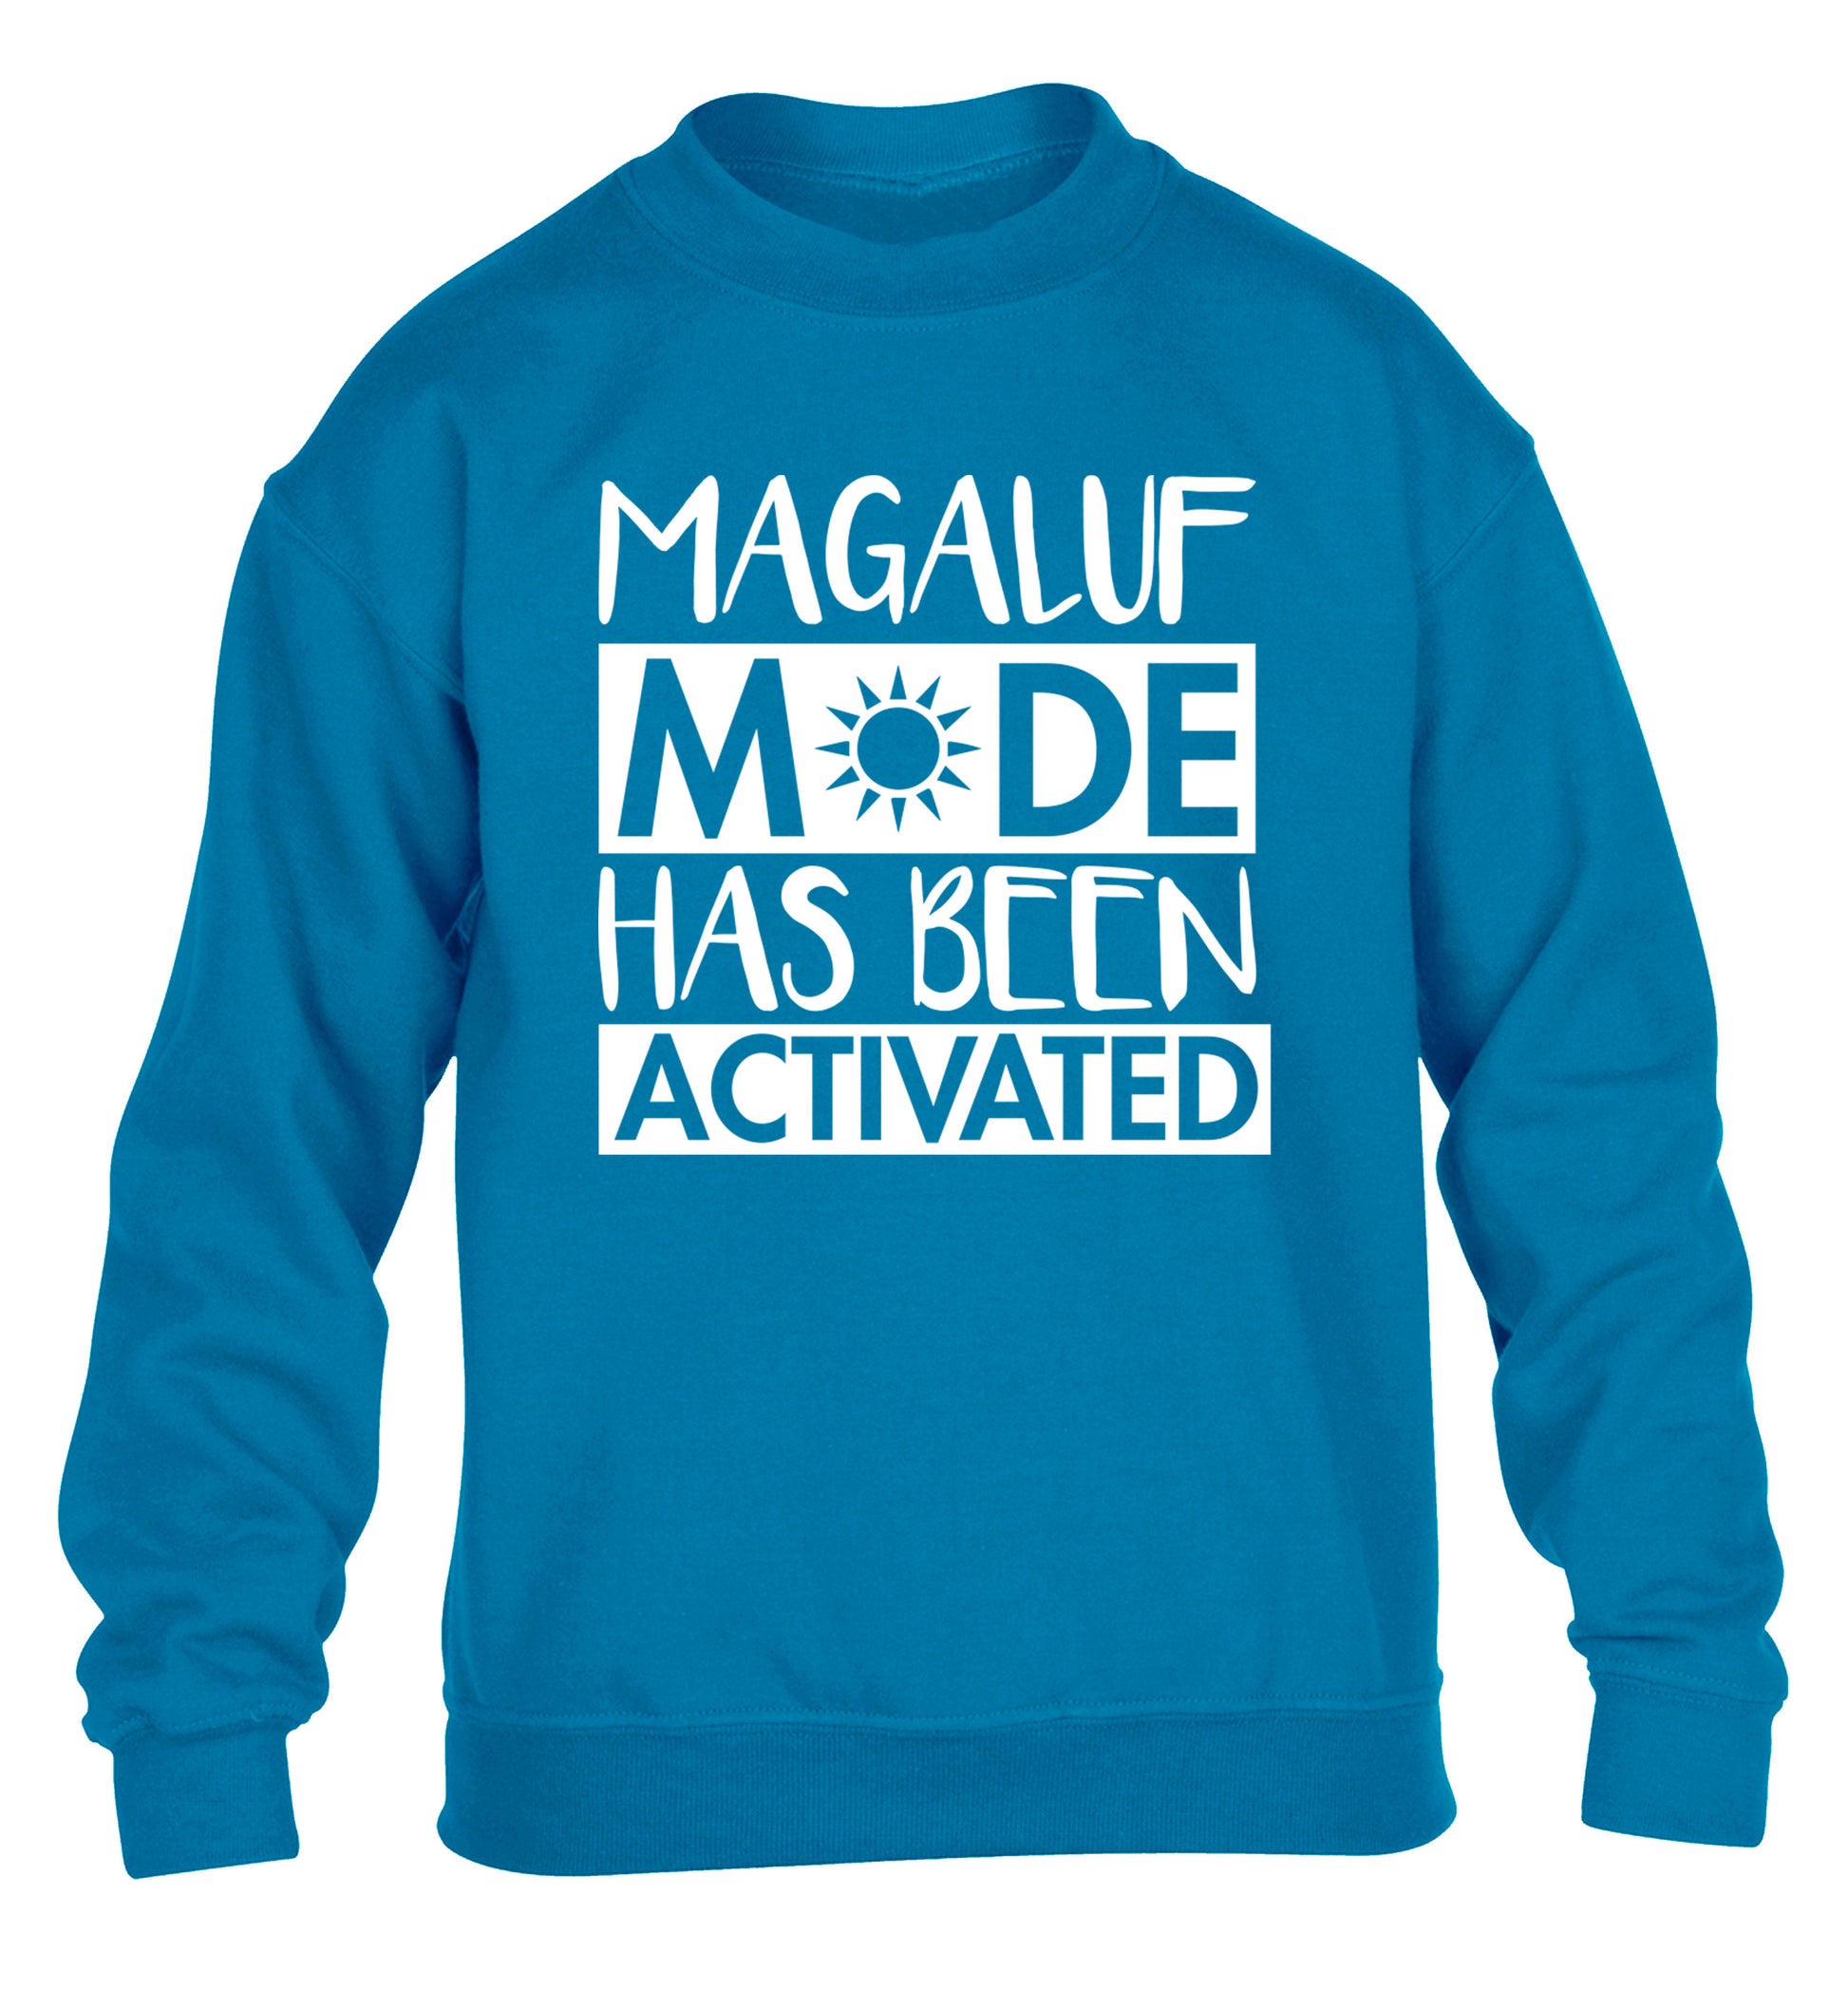 Magaluf mode has been activated children's blue sweater 12-13 Years